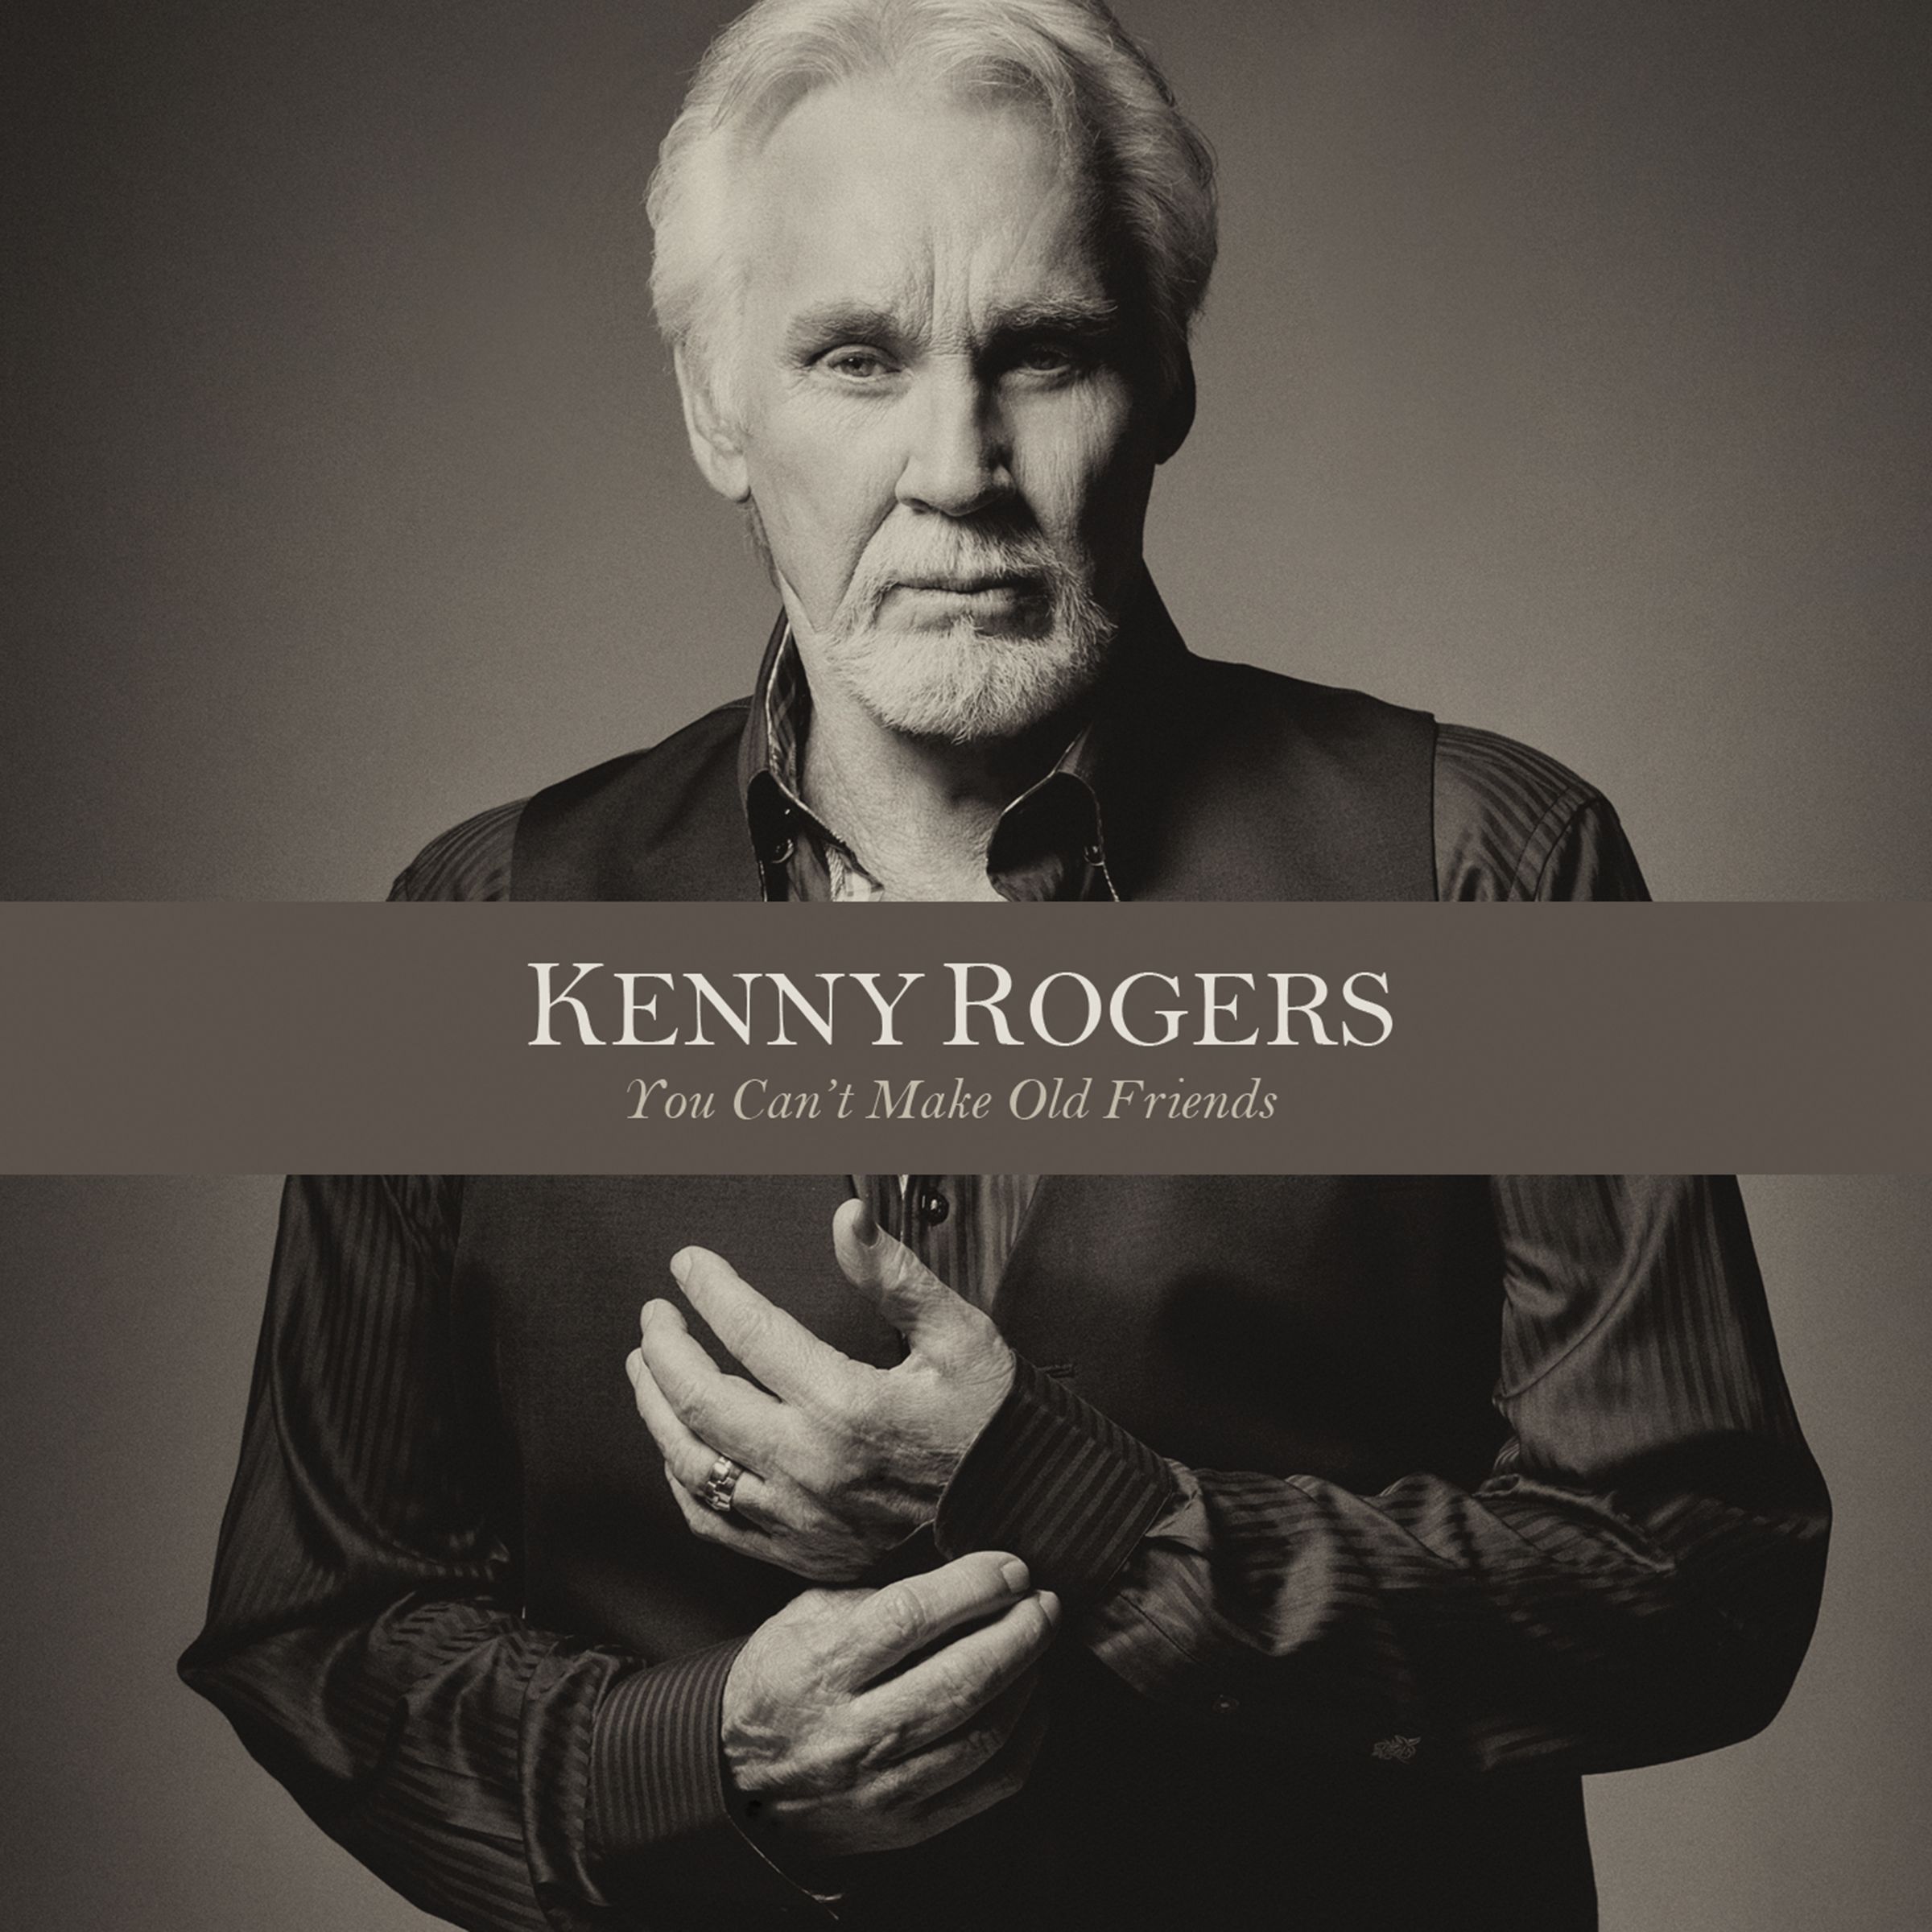 Kenny Rogers - You Can’t Make Old Friends (2013) [HDTracks FLAC 24bit/96kHz]